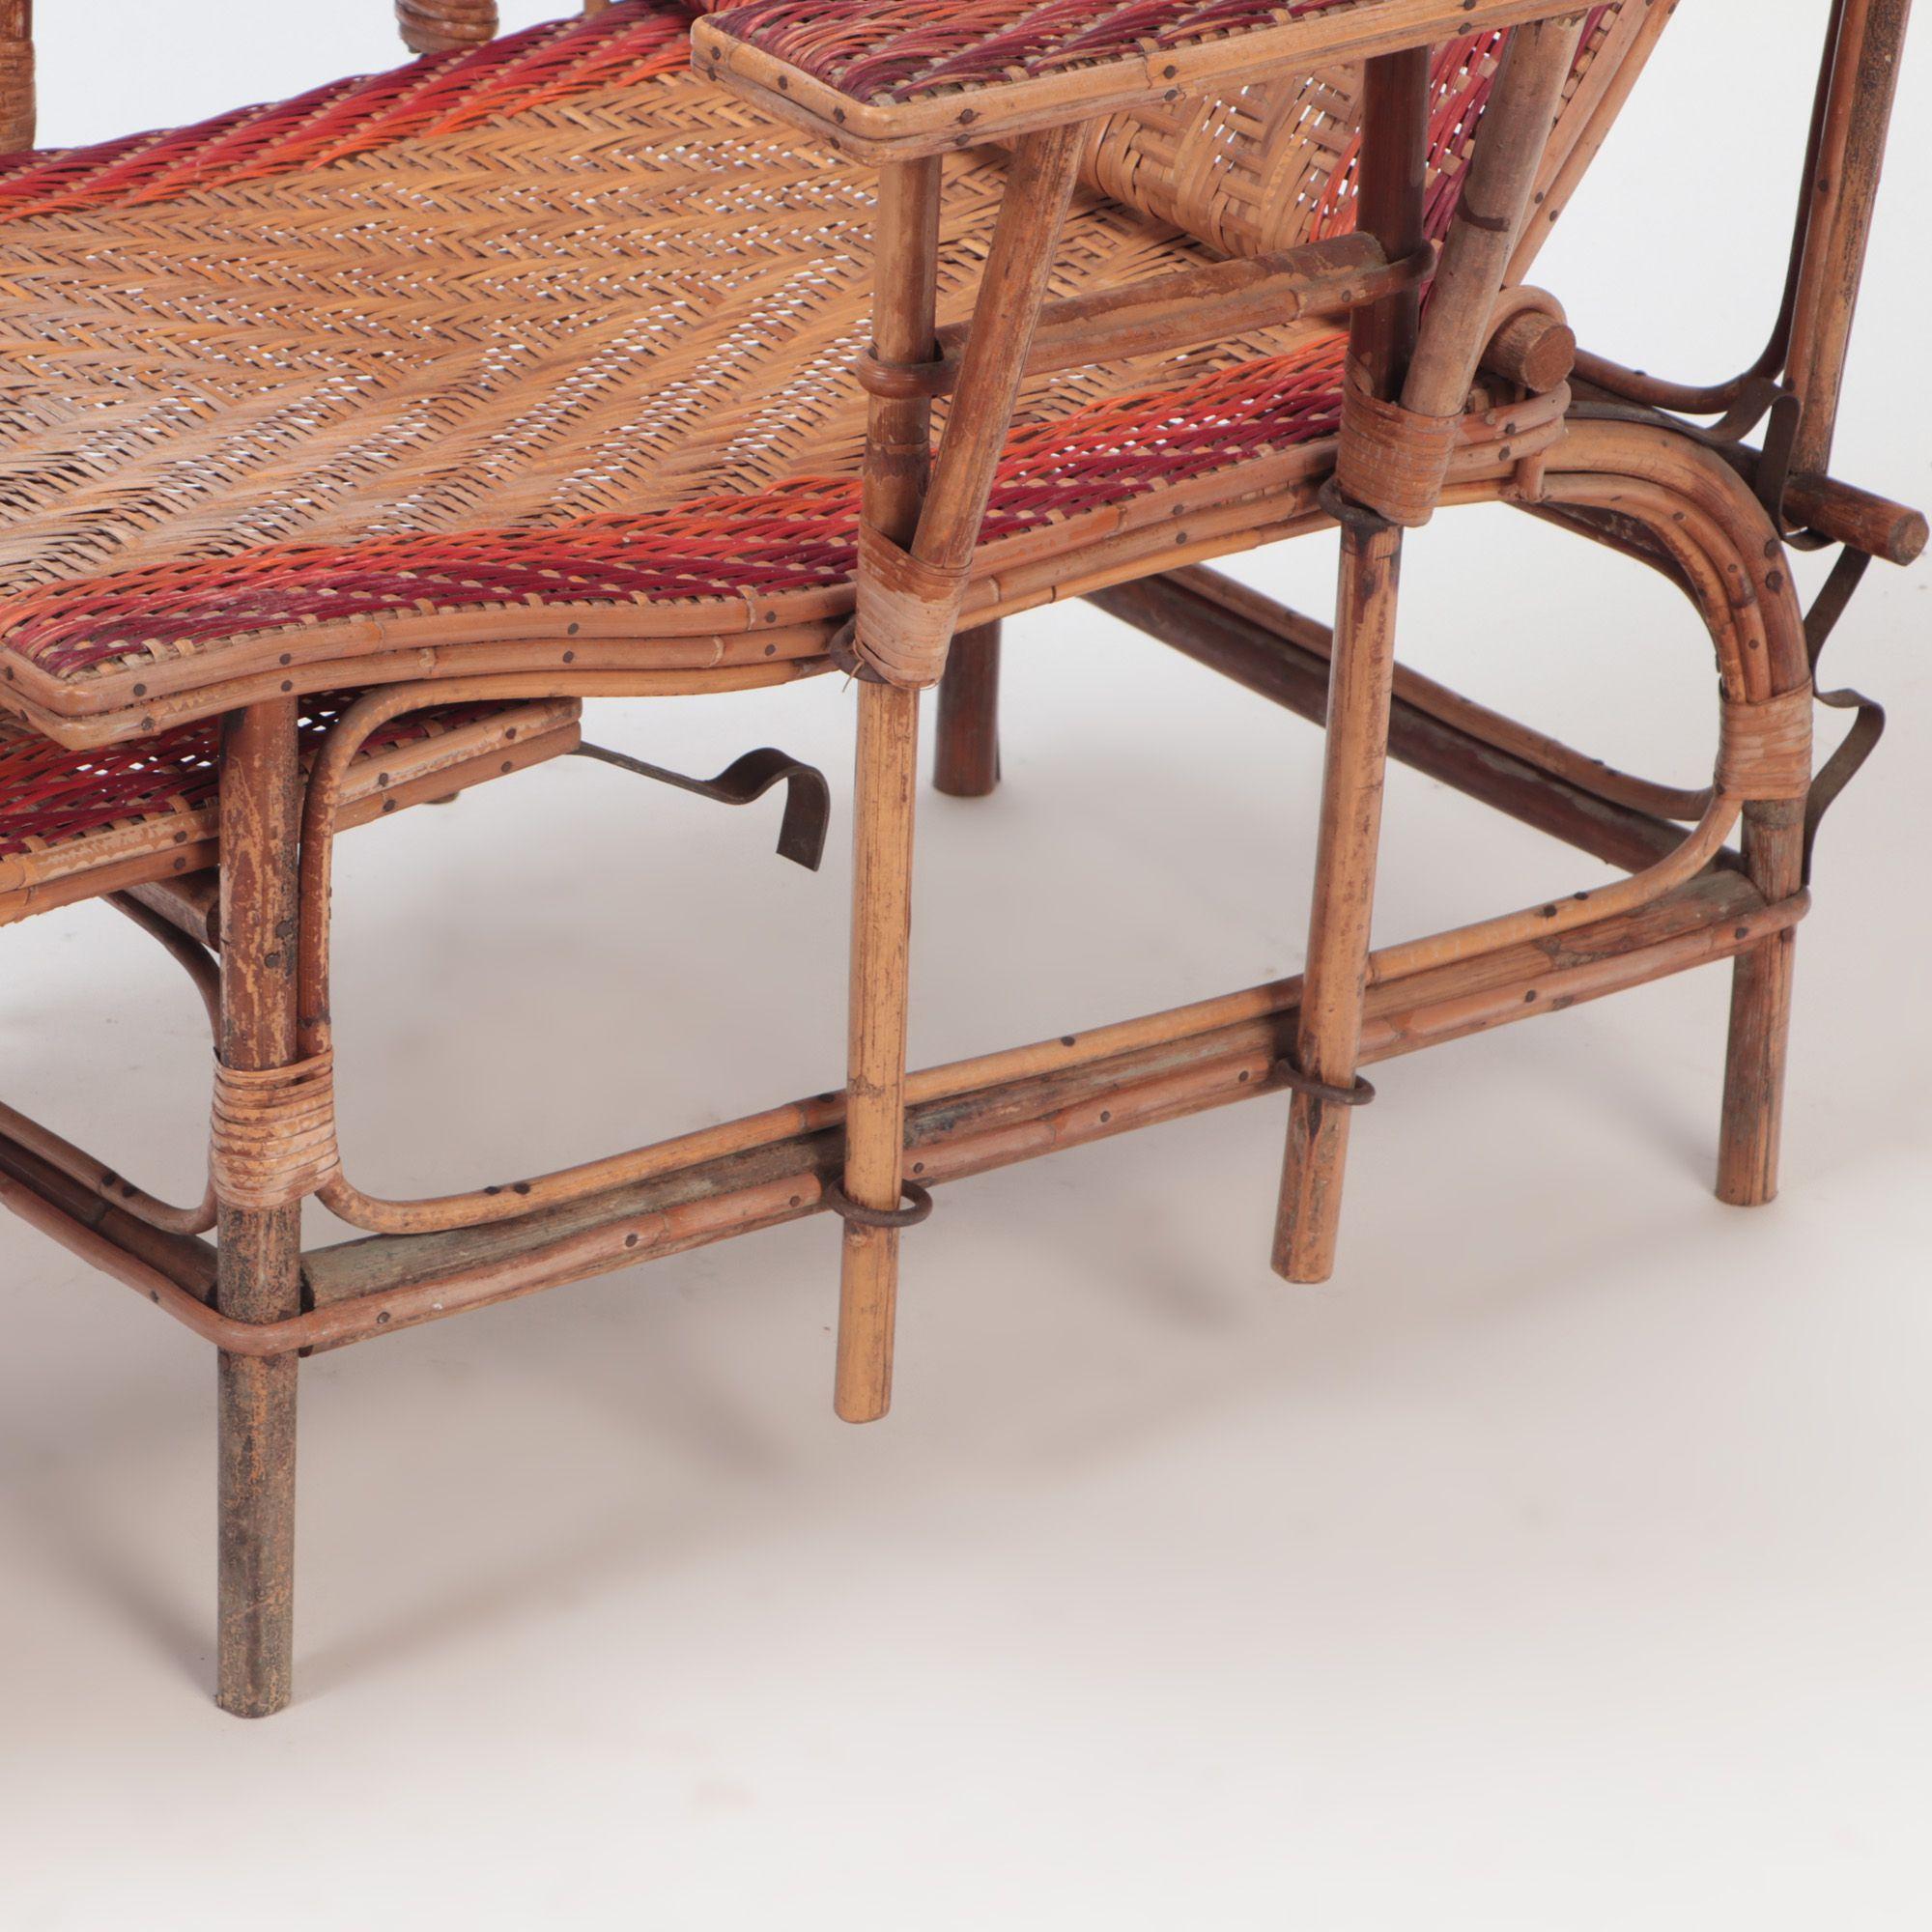 French Rattan Chaise Longue with Orange and Red Stripes, circa 1900 For Sale 2